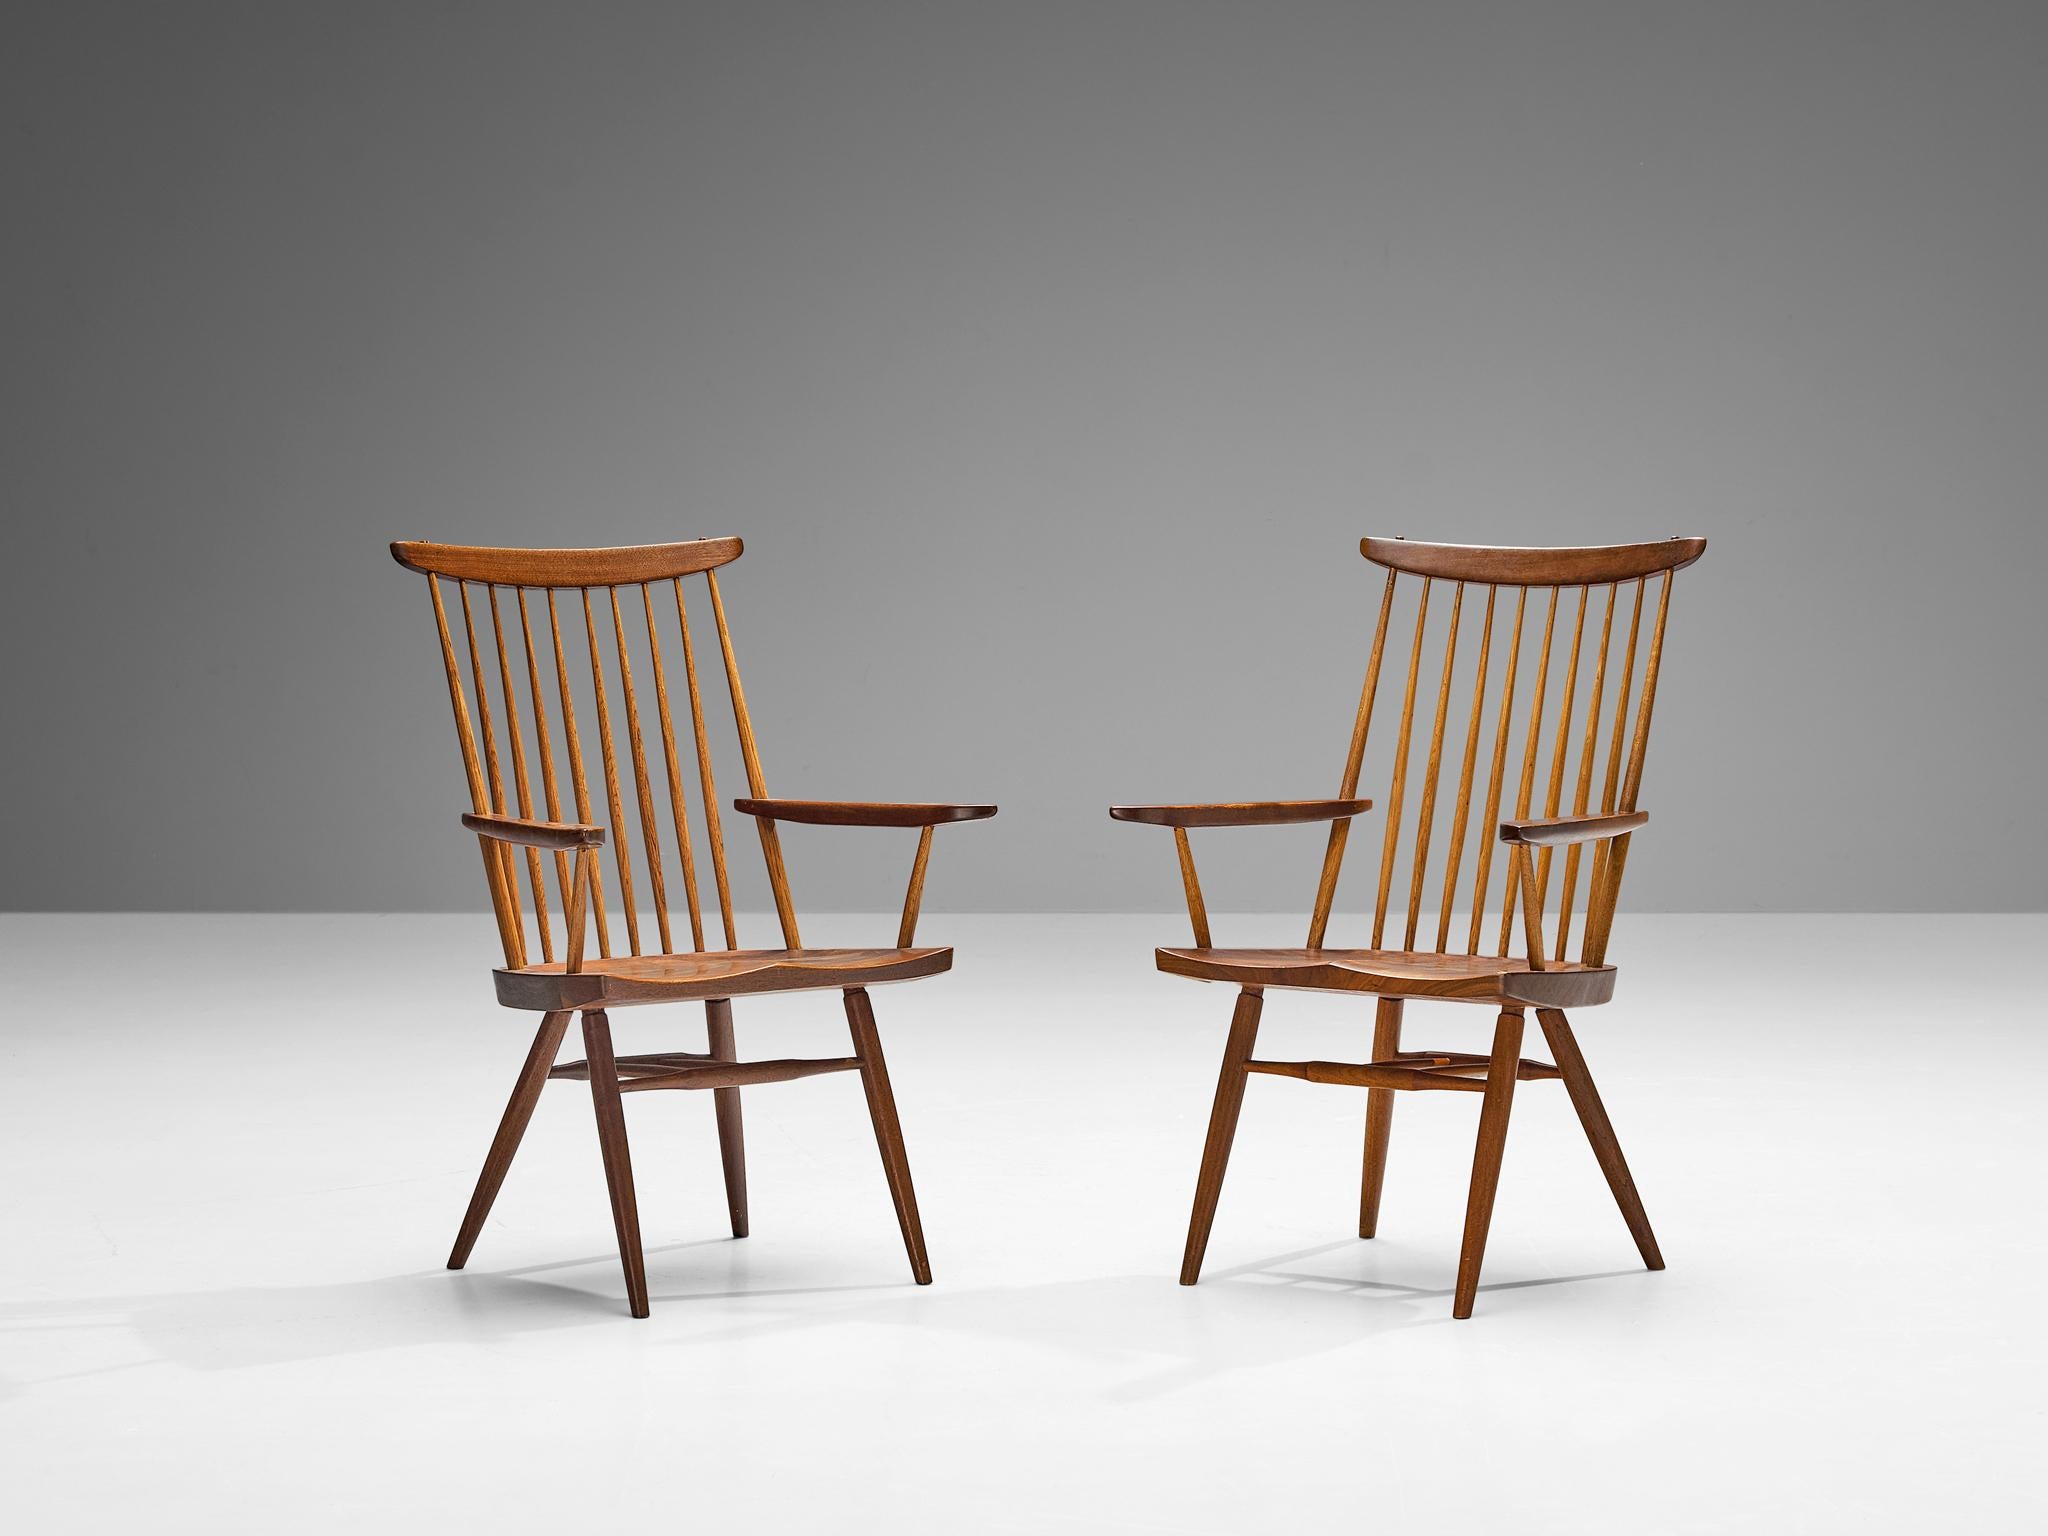 George Nakashima for Nakashima Studio, ‘New’ armchairs, walnut, hickory, United States, 1960 

With regard to its essential form, material use, and woodwork, this ‘New’ armchair is a testimony to George Nakashima's expert craftsmanship and